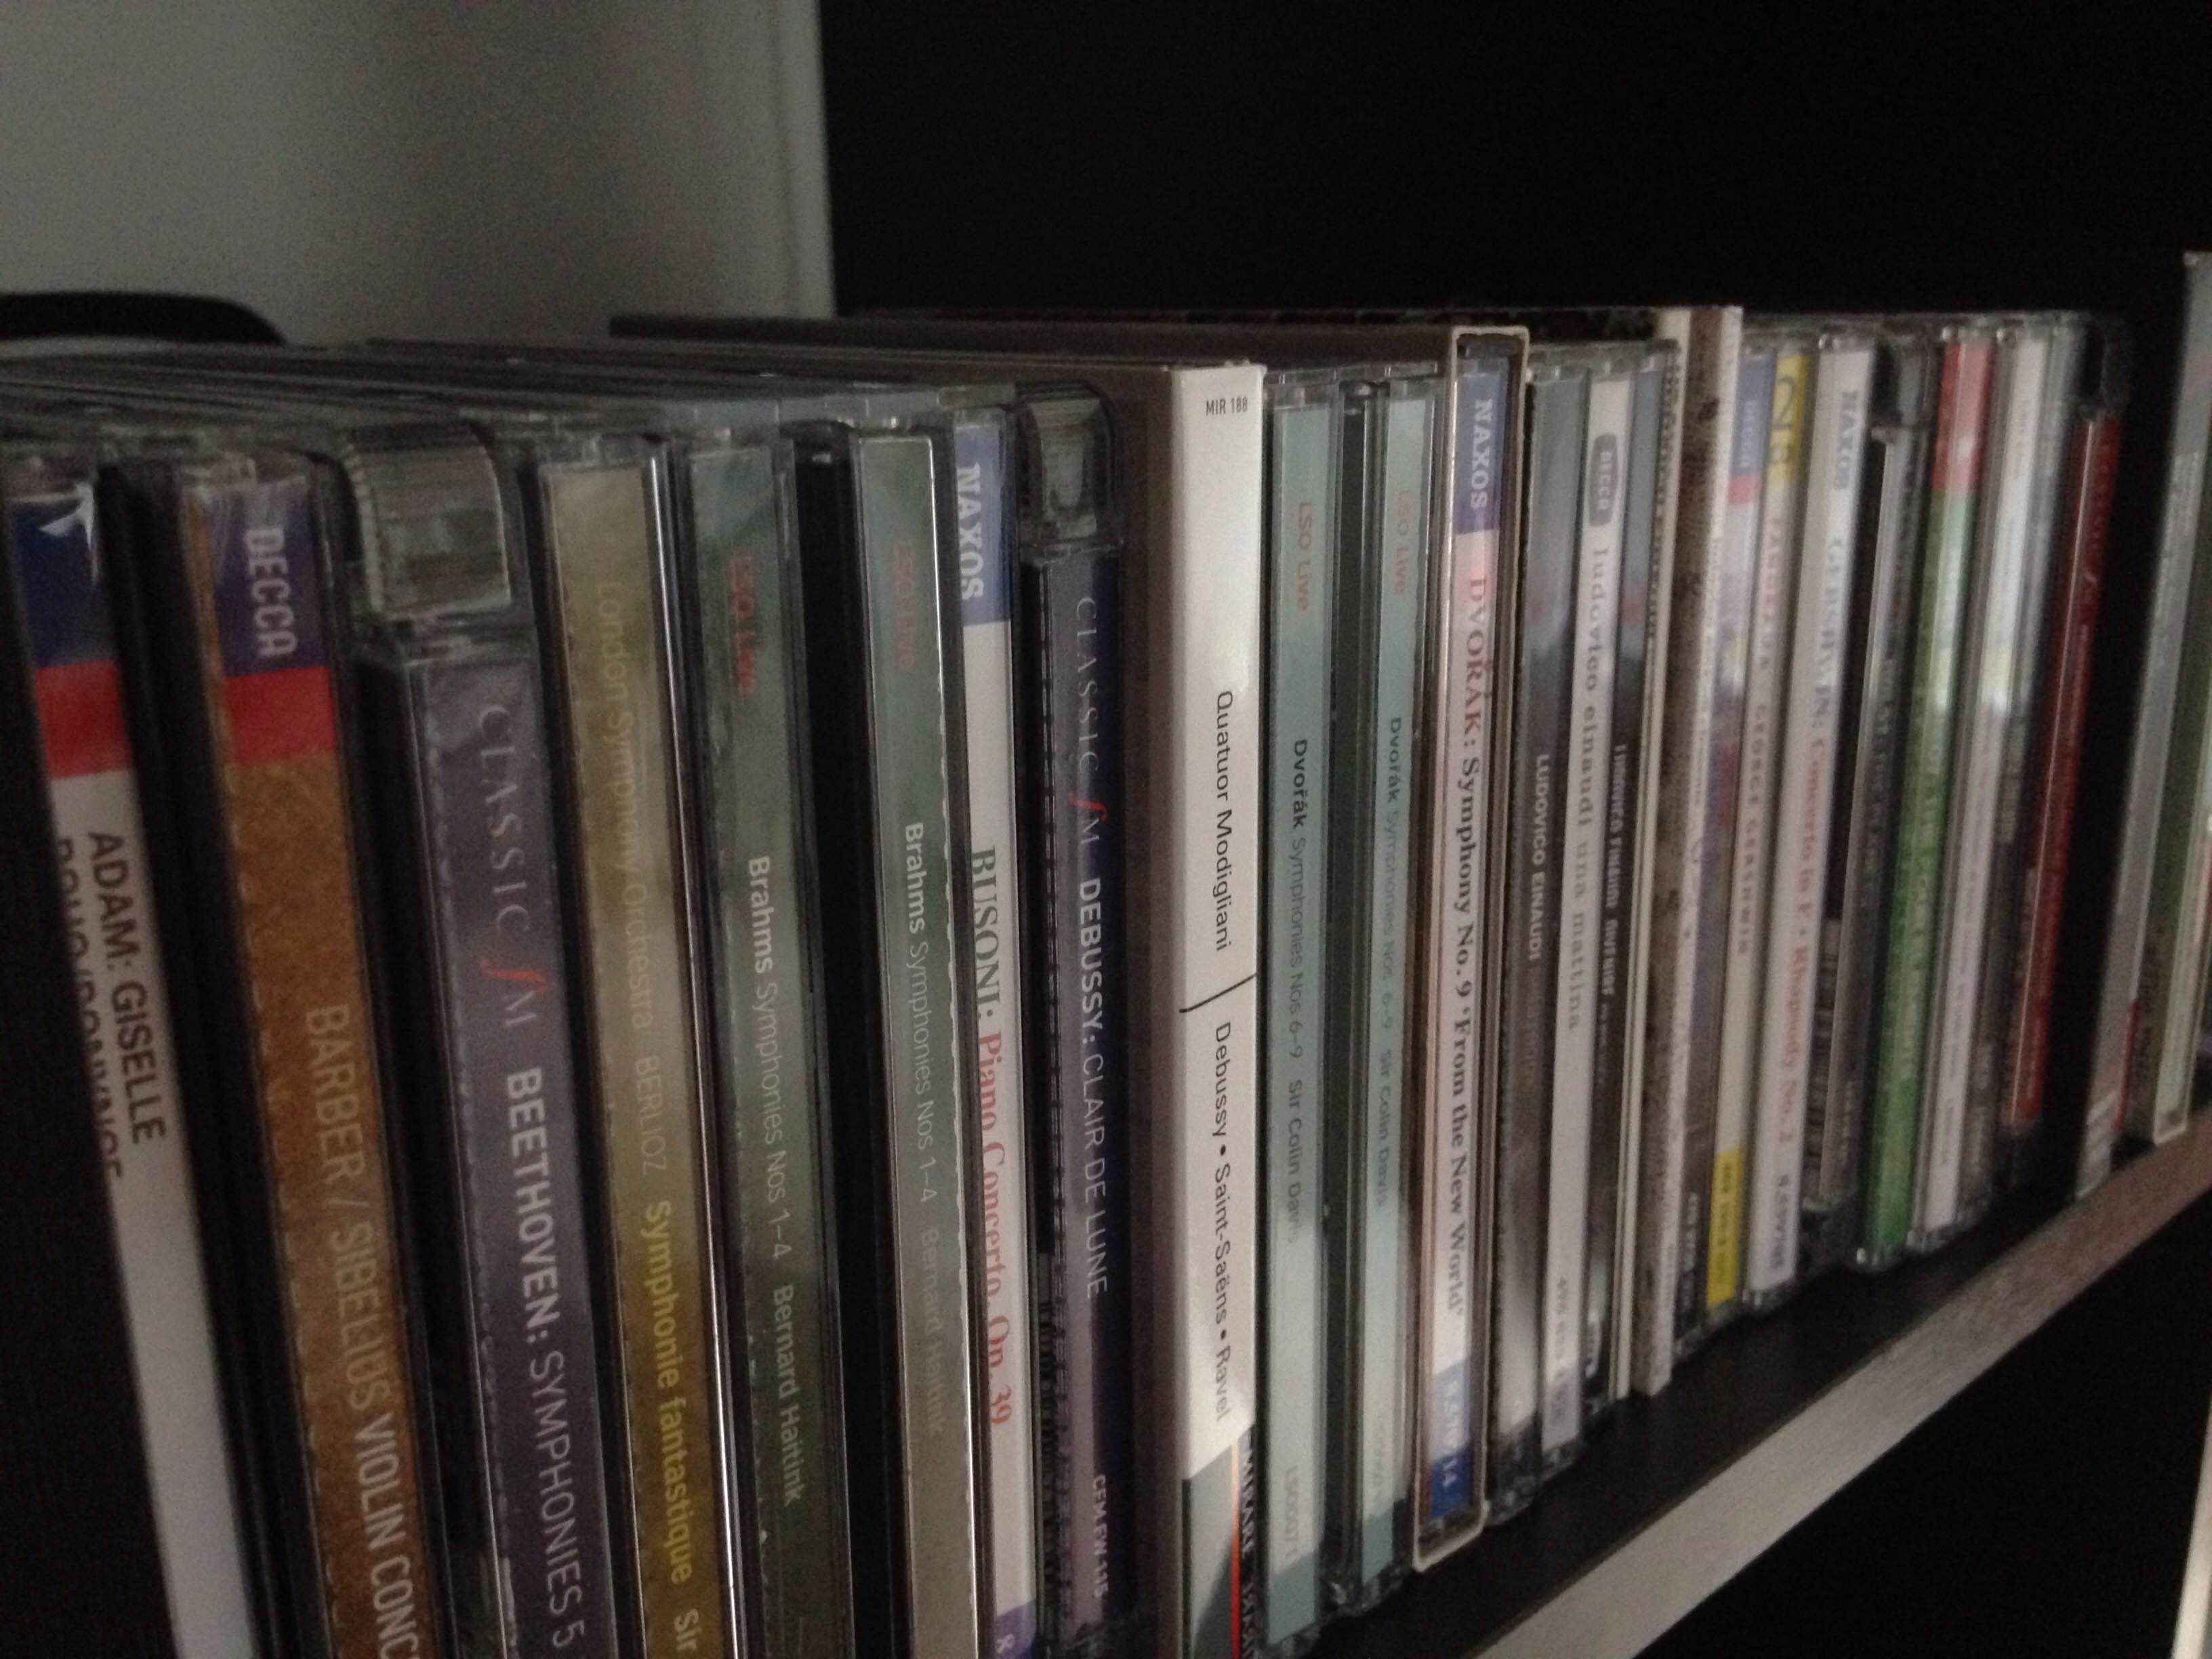 A shelf filled with CD cases, stacked vertically